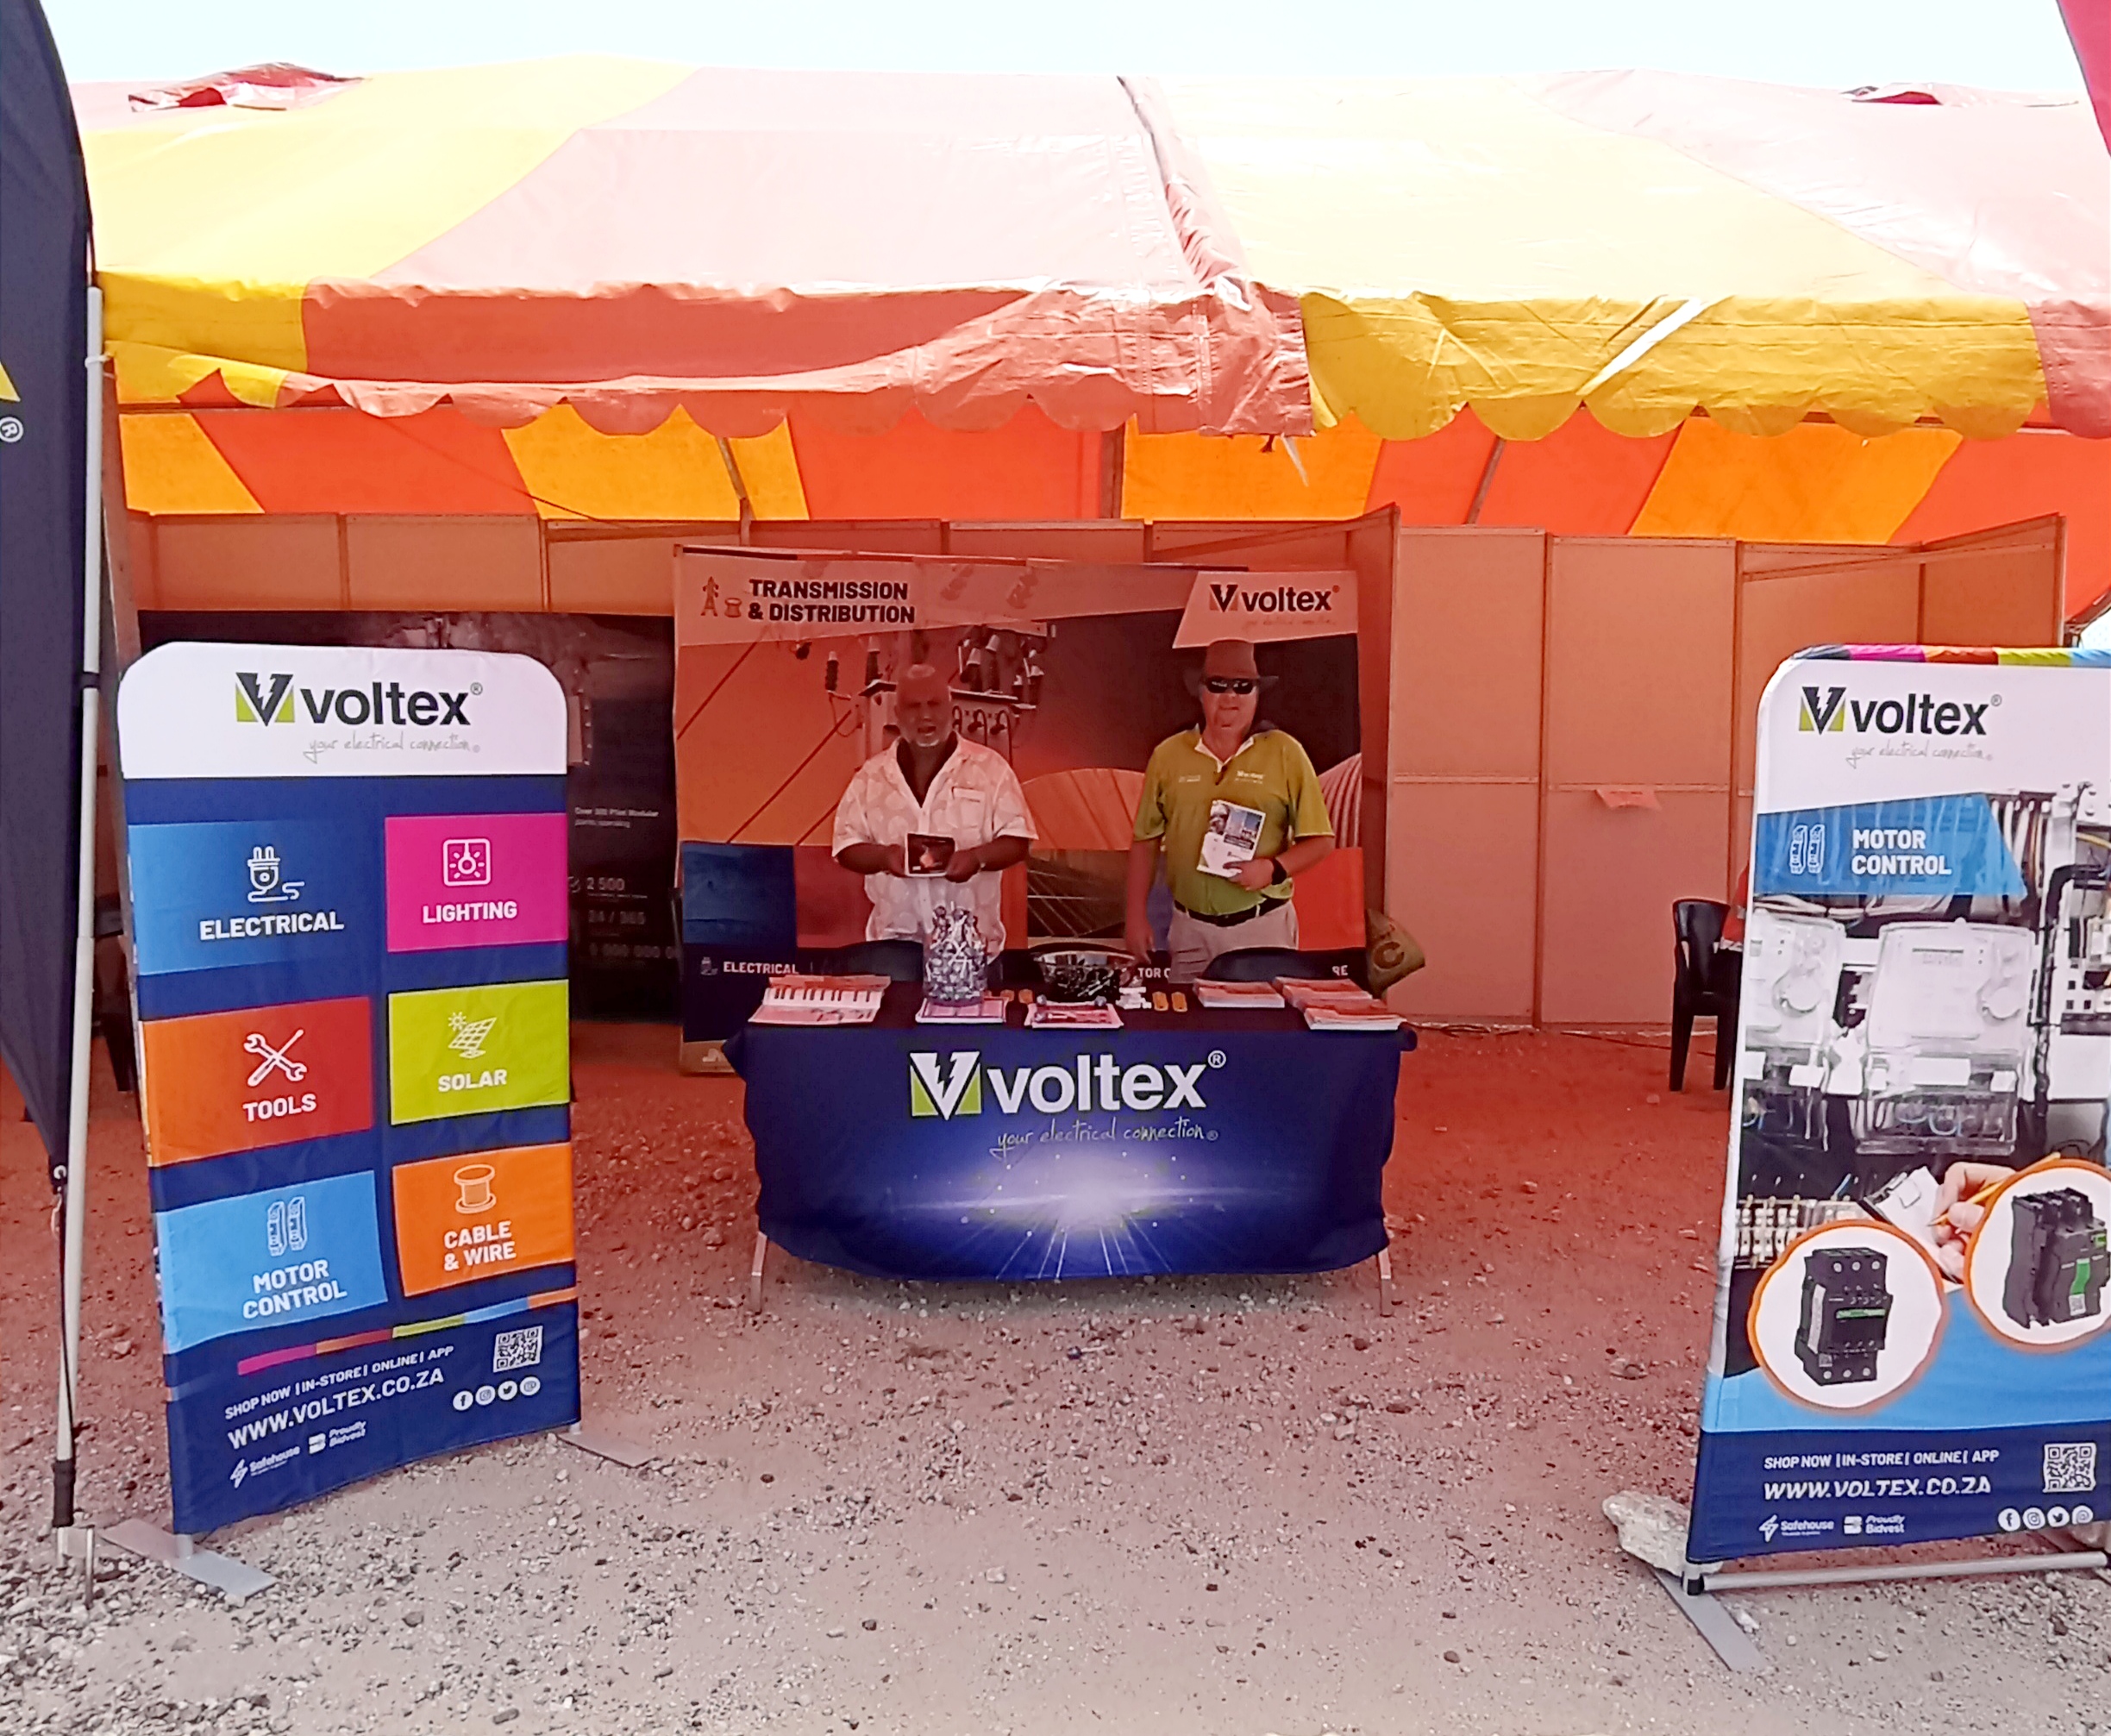 Unveiling Opportunities in the Heat: Voltex’s experience at the MTE Show in Botswana